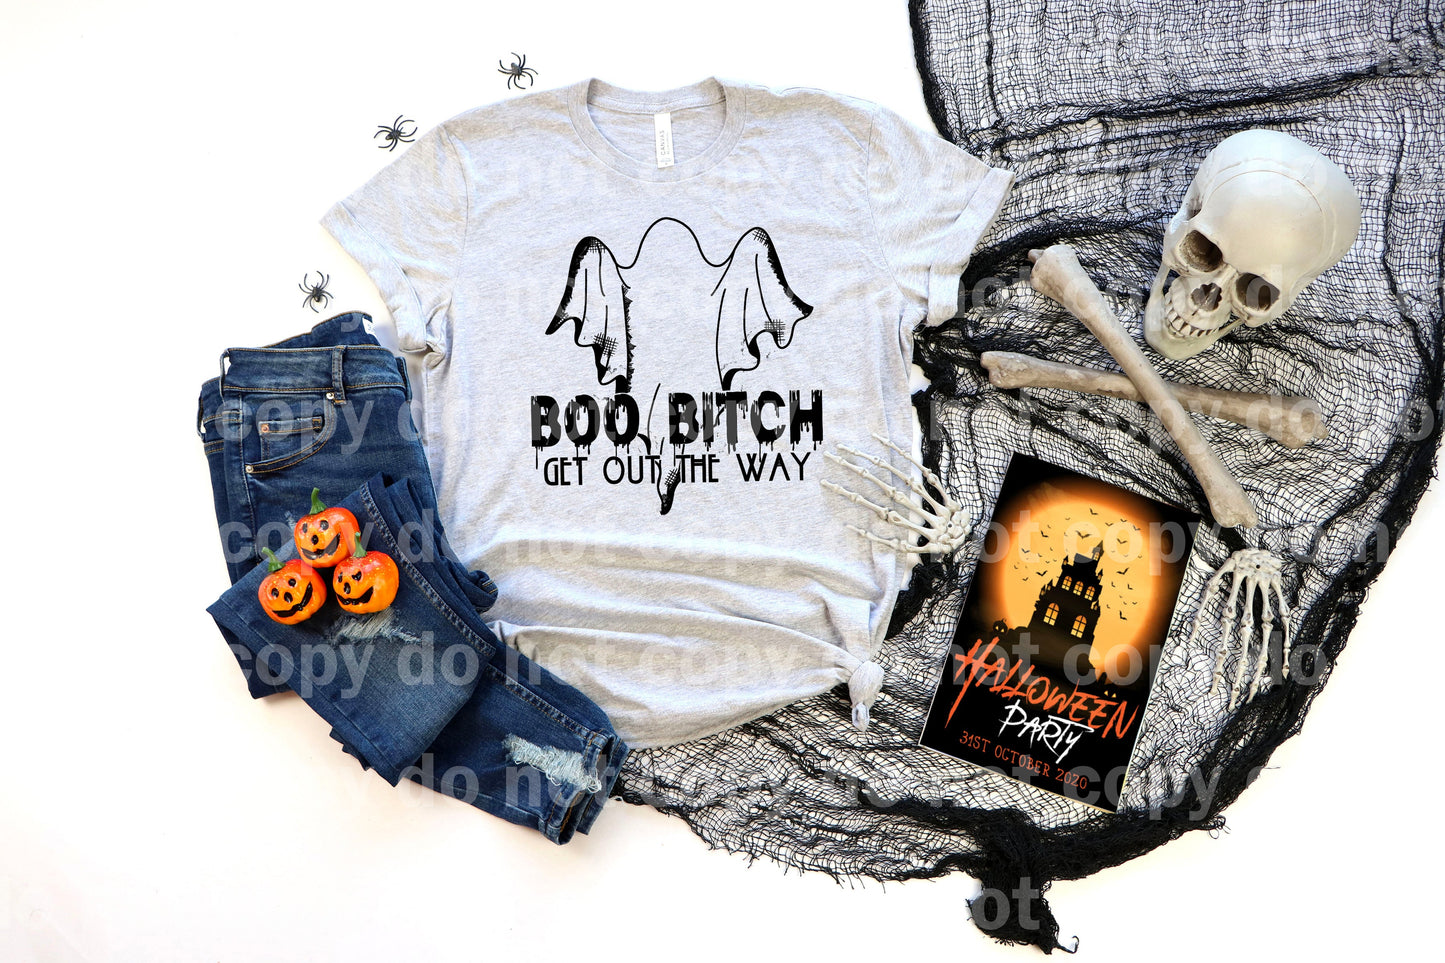 Boo Bitch Get Out The Way Dream Print or Sublimation Print